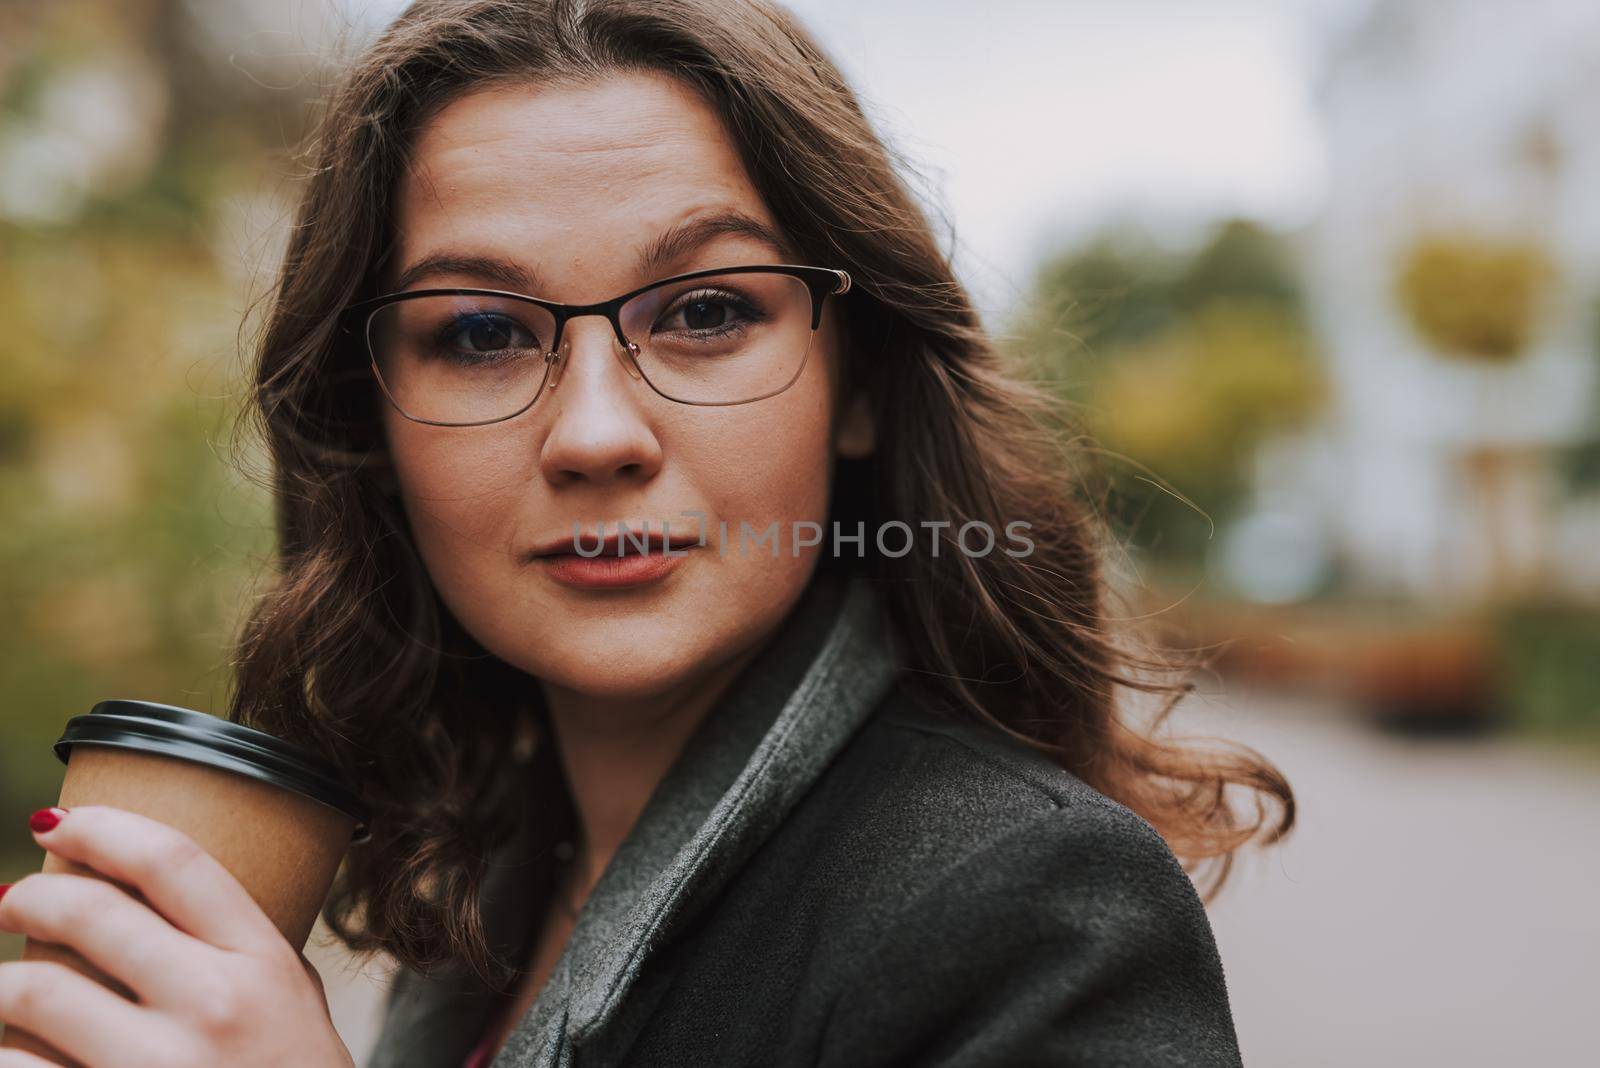 Portrait of attractive bespectacled young woman in the street holding a cup of coffee to go